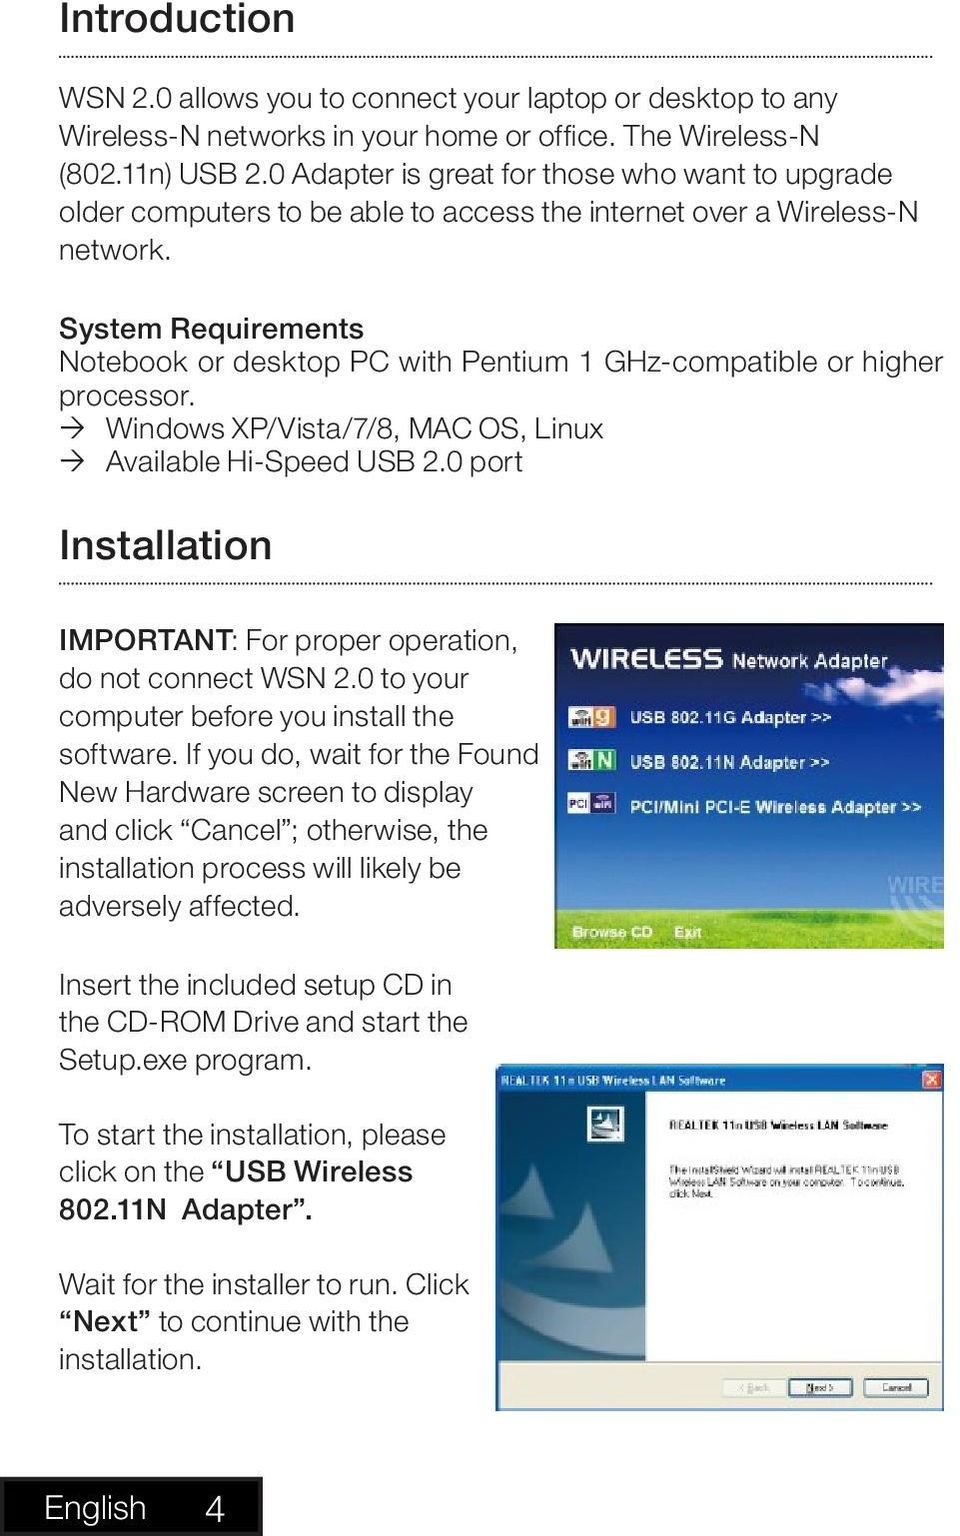 System Requirements Notebook or desktop PC with Pentium 1 GHz-compatible or higher processor. Windows XP/Vista/7/8, MAC OS, Linux Available Hi-Speed USB 2.